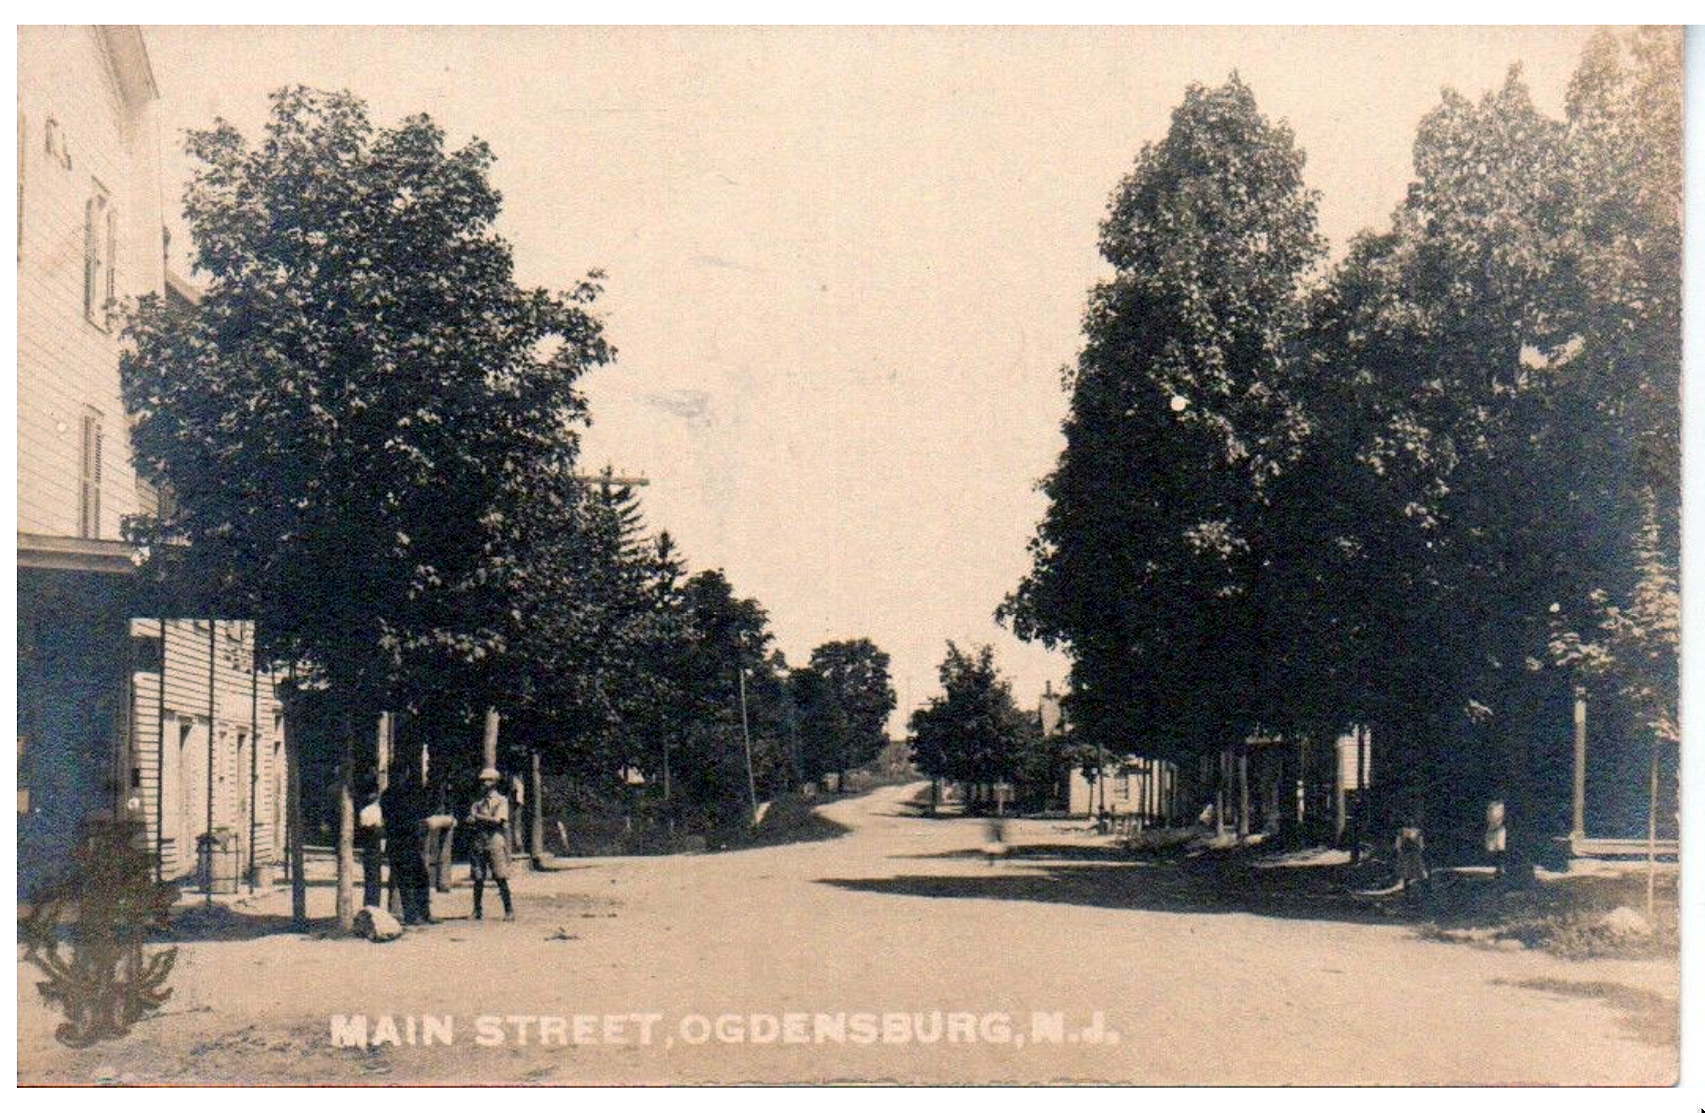 Ogdensburg - Main Street - Ayers and Smith - c 1905